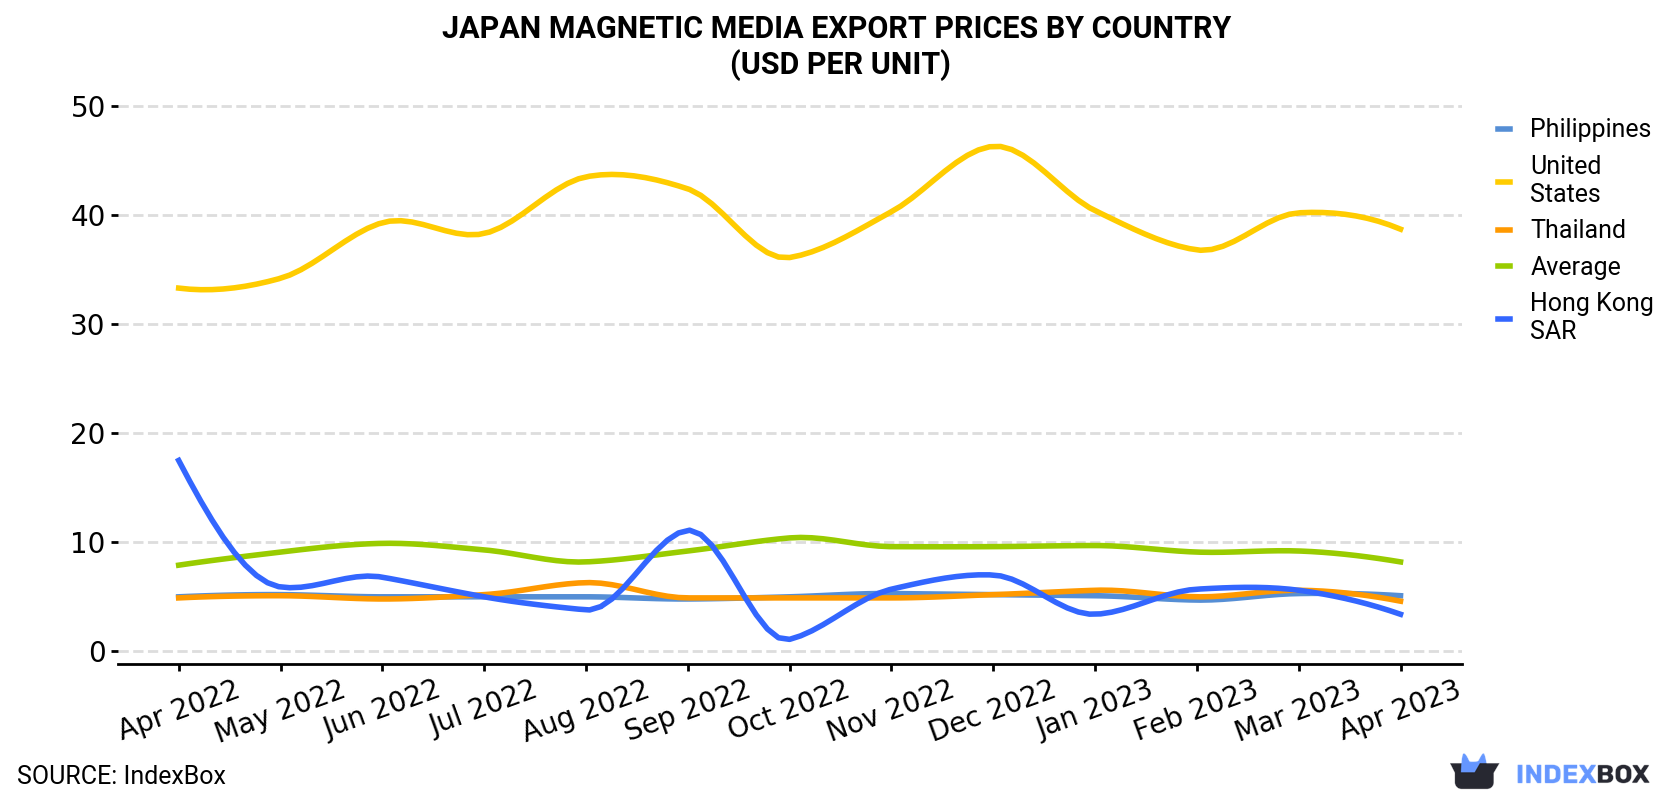 Japan Magnetic Media Export Prices By Country (USD Per Unit)